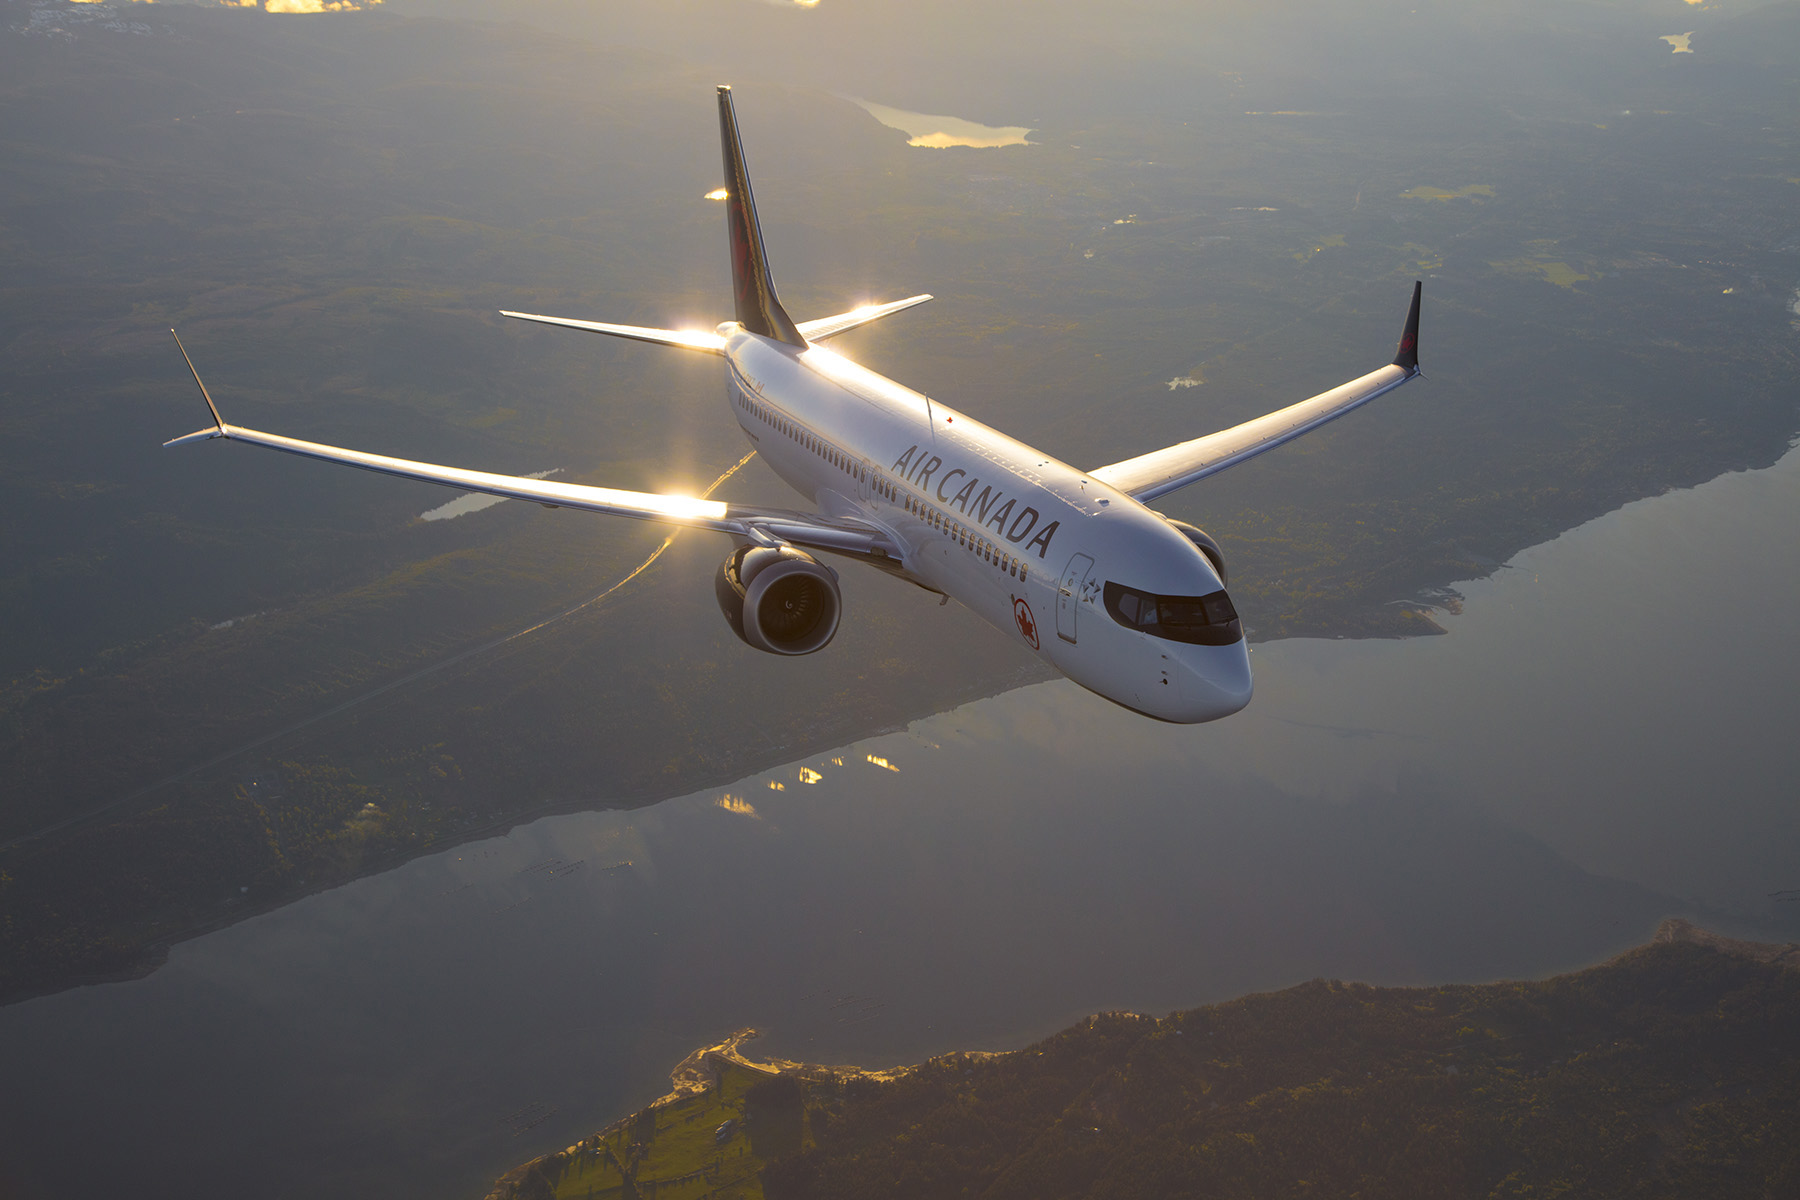 B737 Max flying over a river with the sun reflecting on the plane's surface